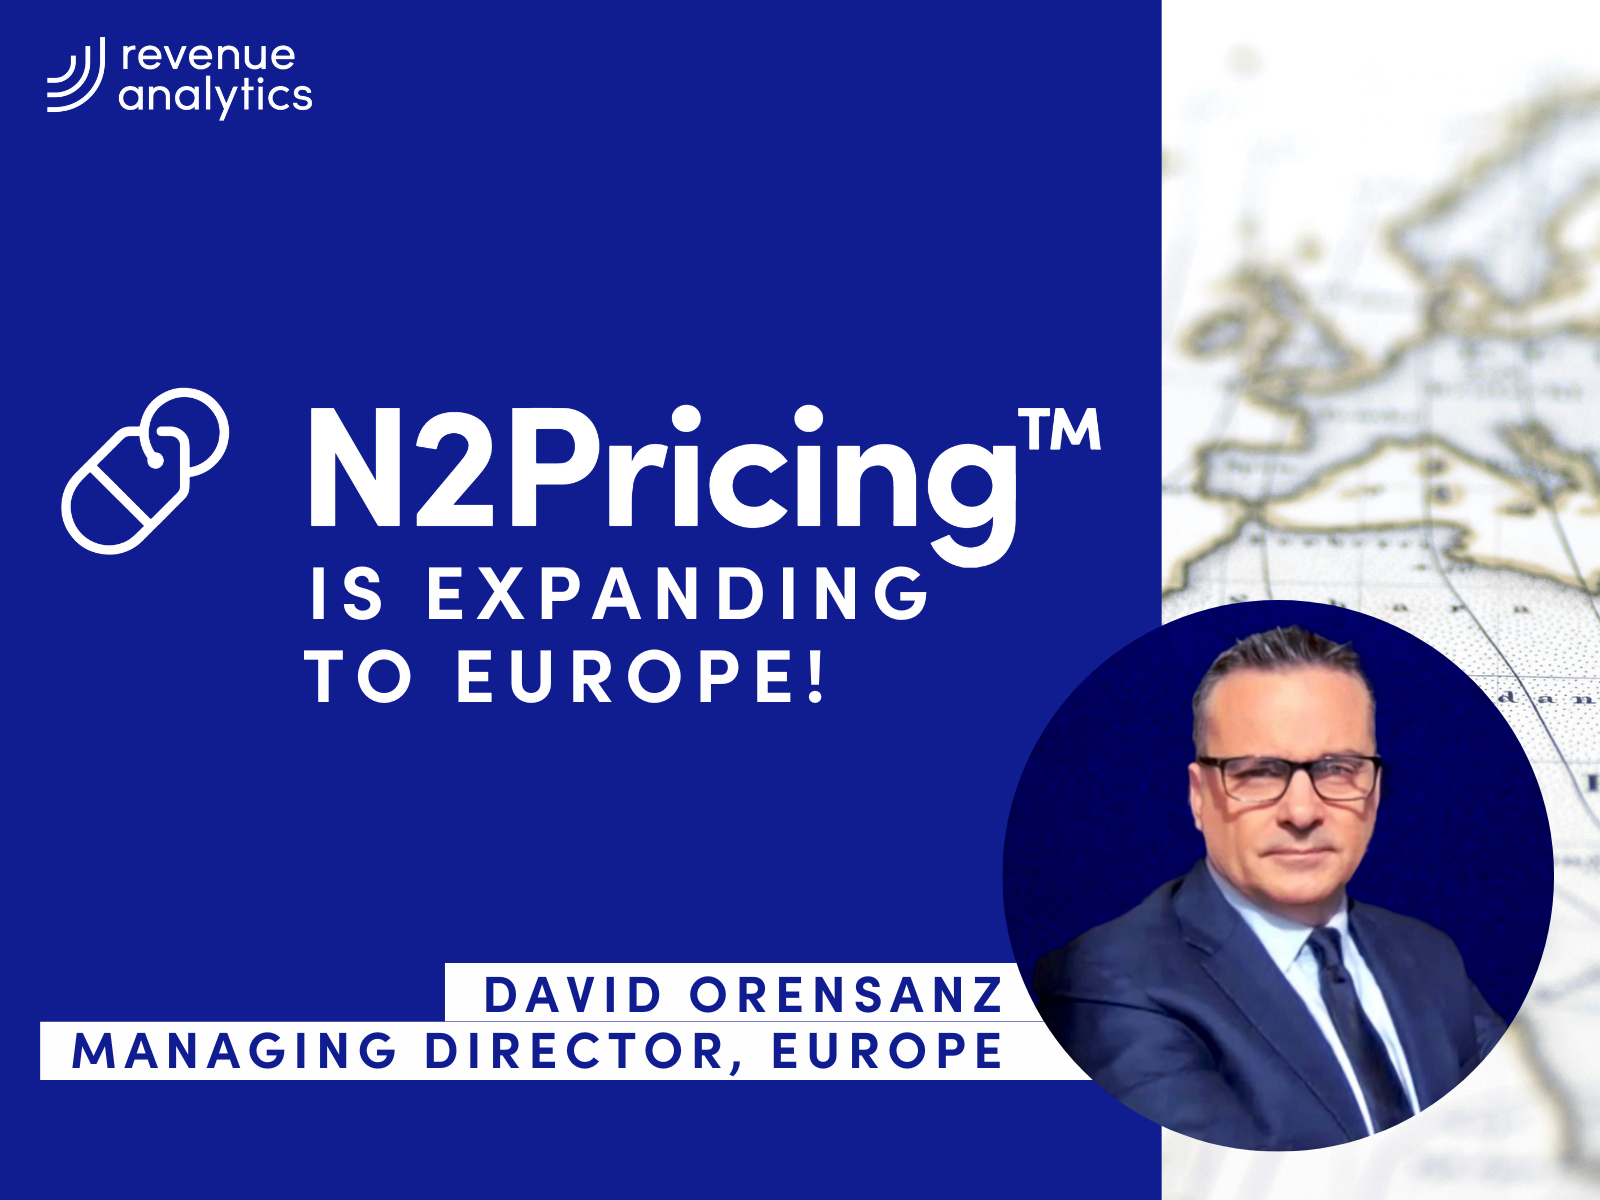 N2Pricing is expanding to Europe